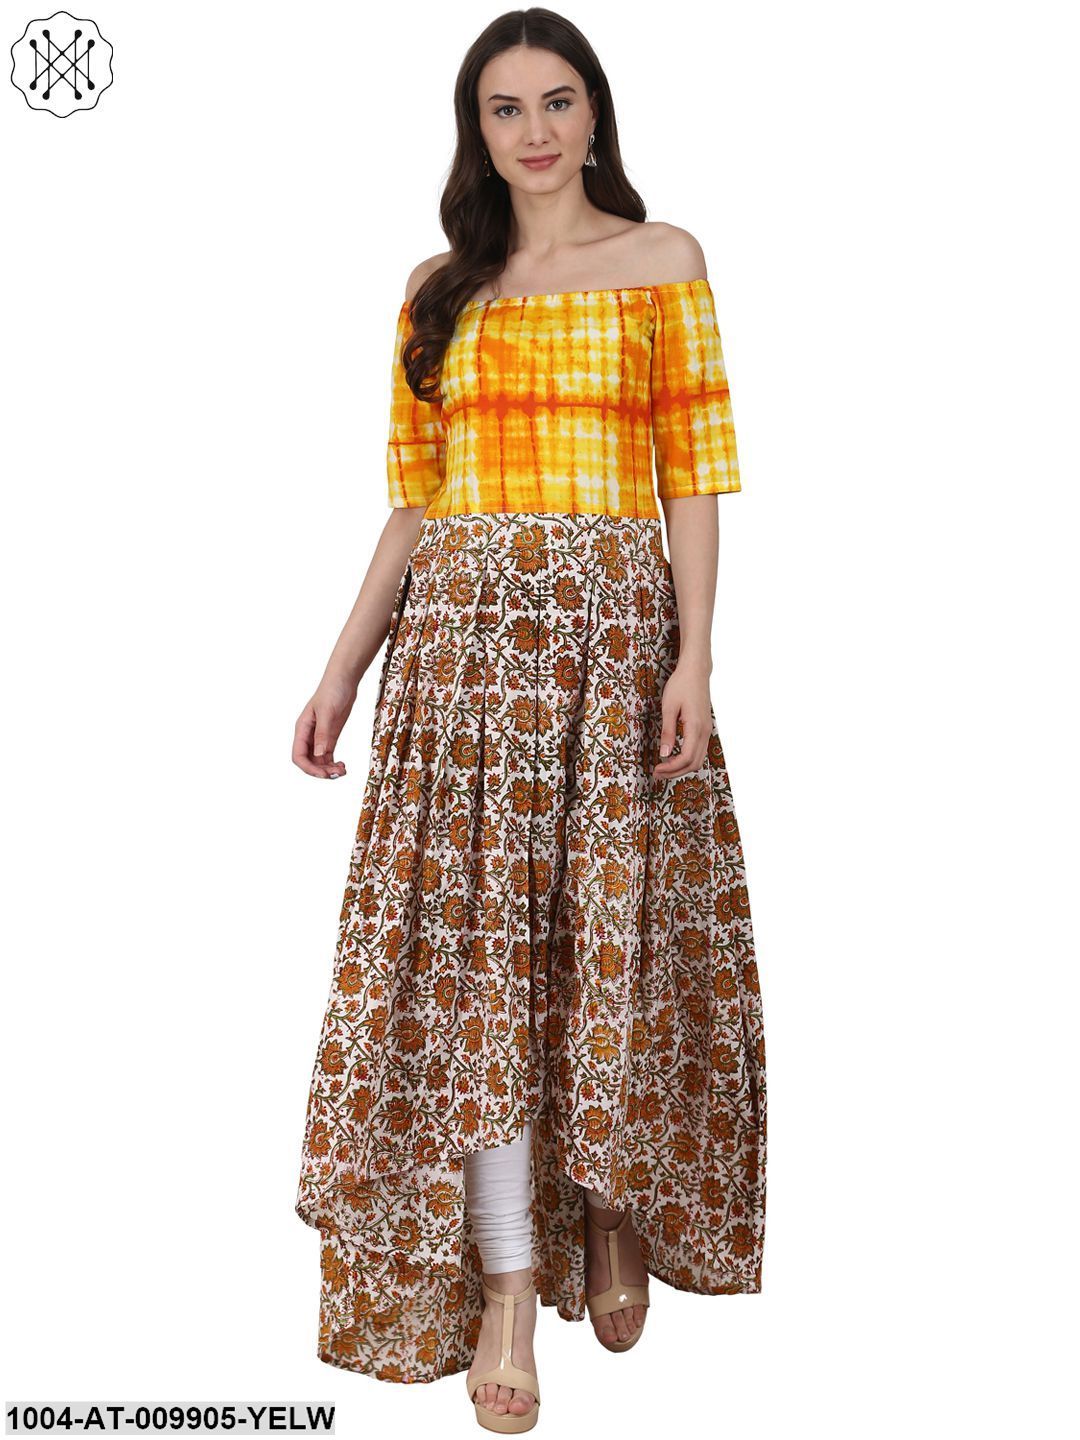 Yellow Printed Drape Shoulder Sleeve Cotton Low High Flared Dress